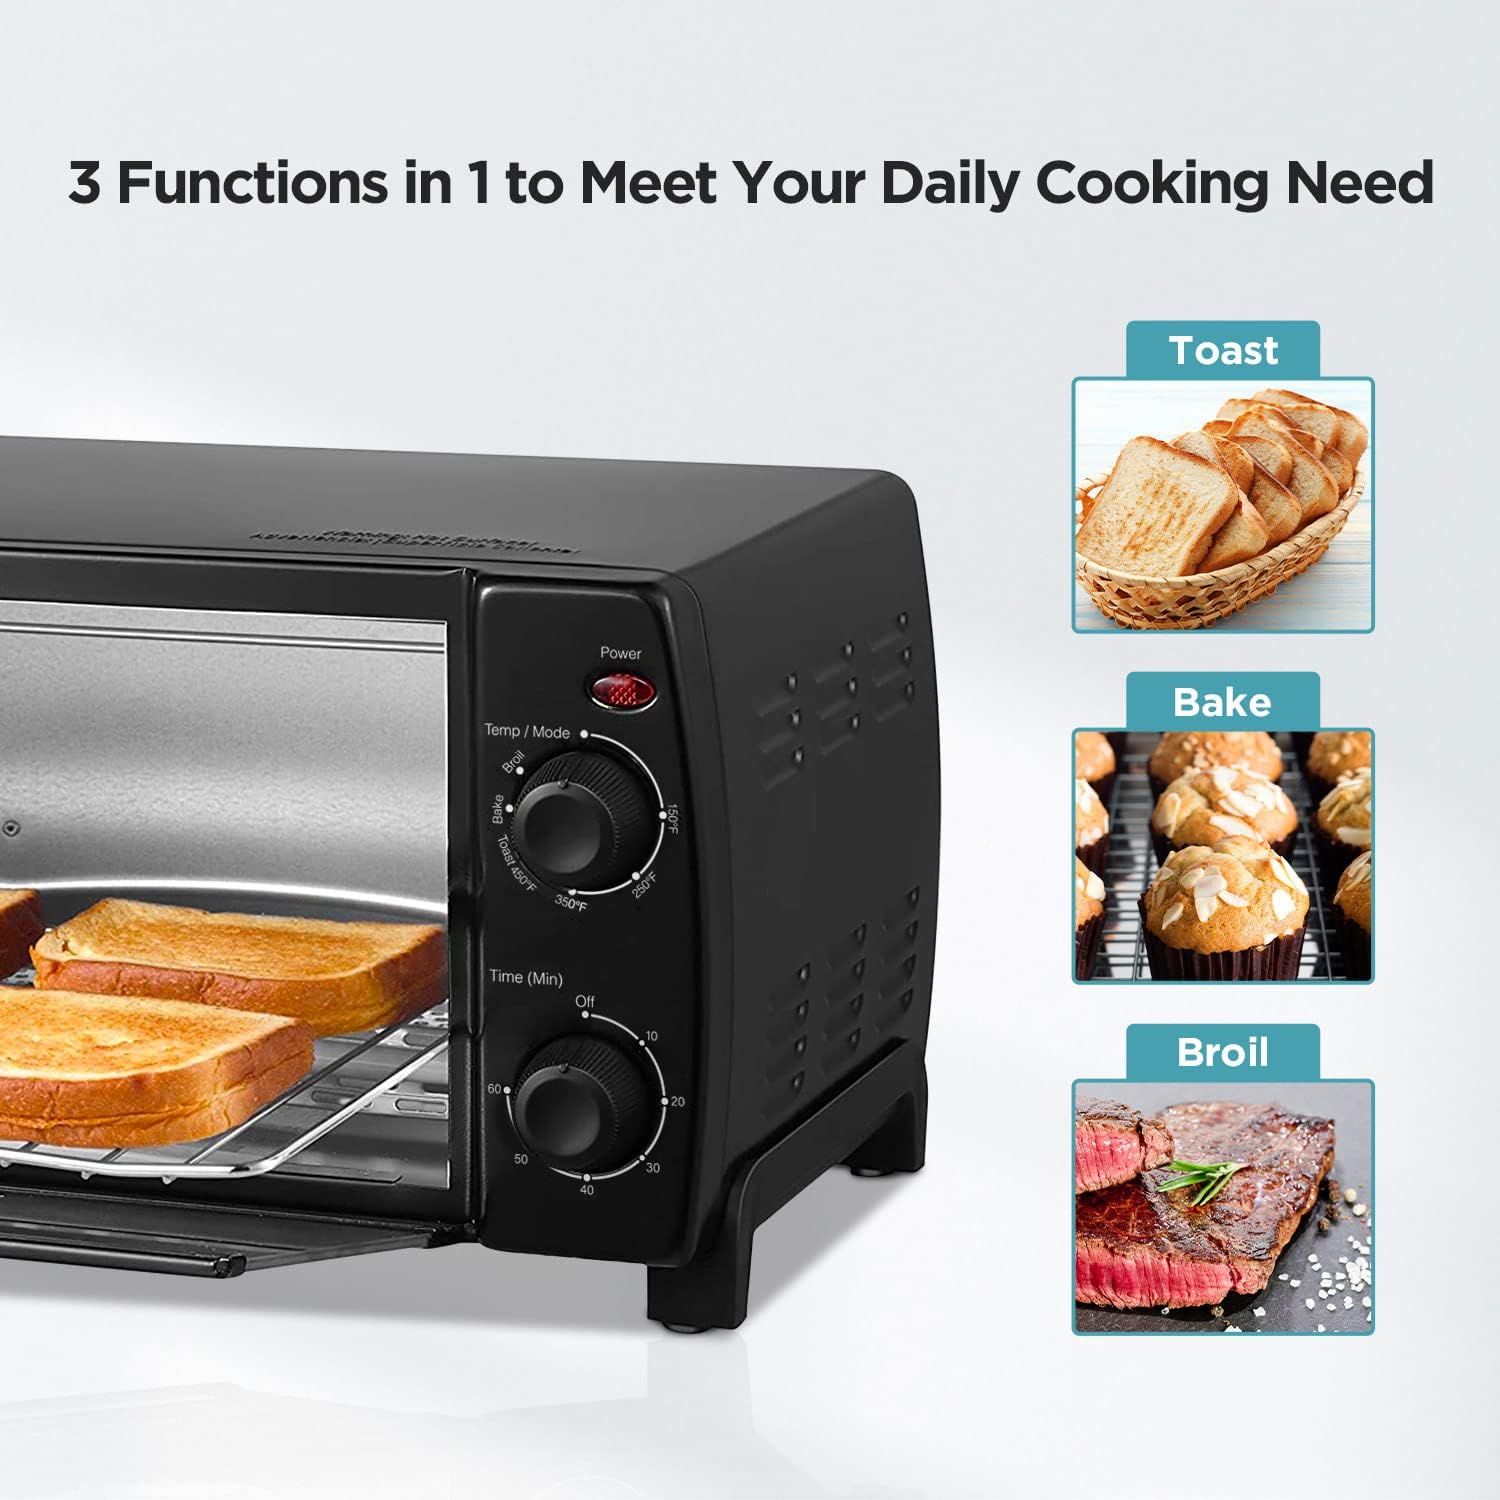 COMFEE' 4 Slice Small Toaster Oven Countertop, 12L with 30-Minute